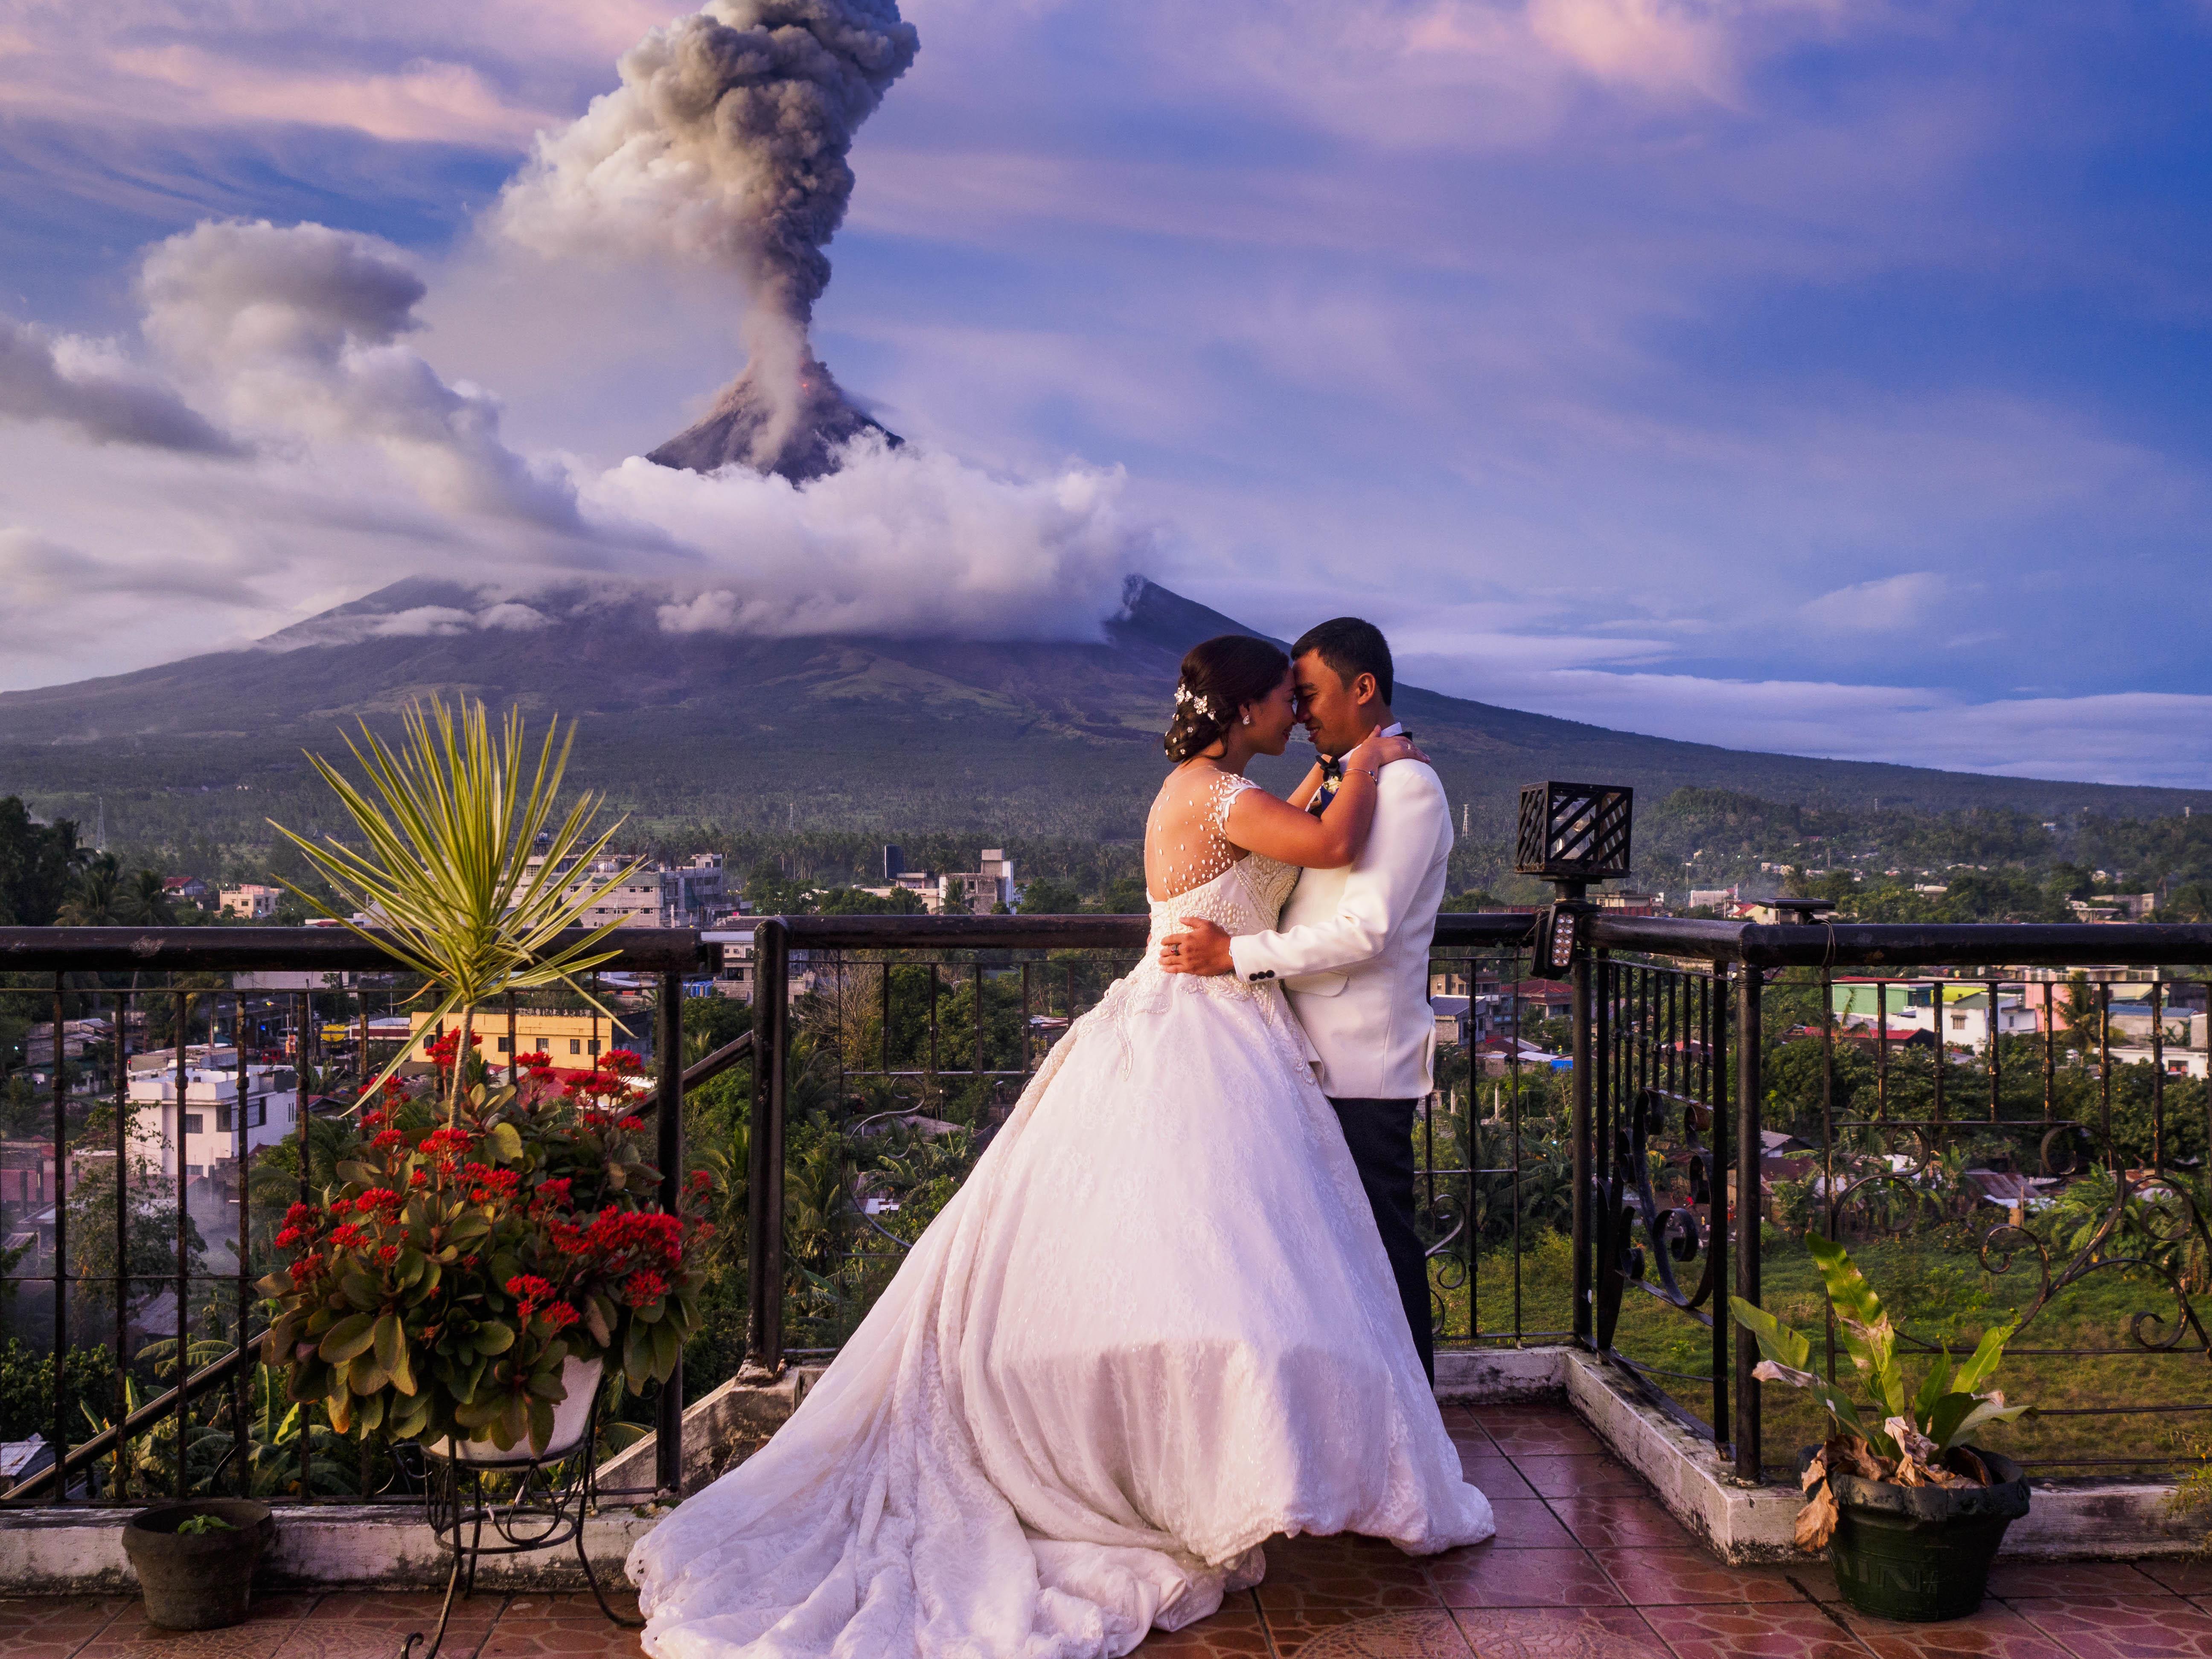 Mount Mayon Volcano Erupts In Philippines